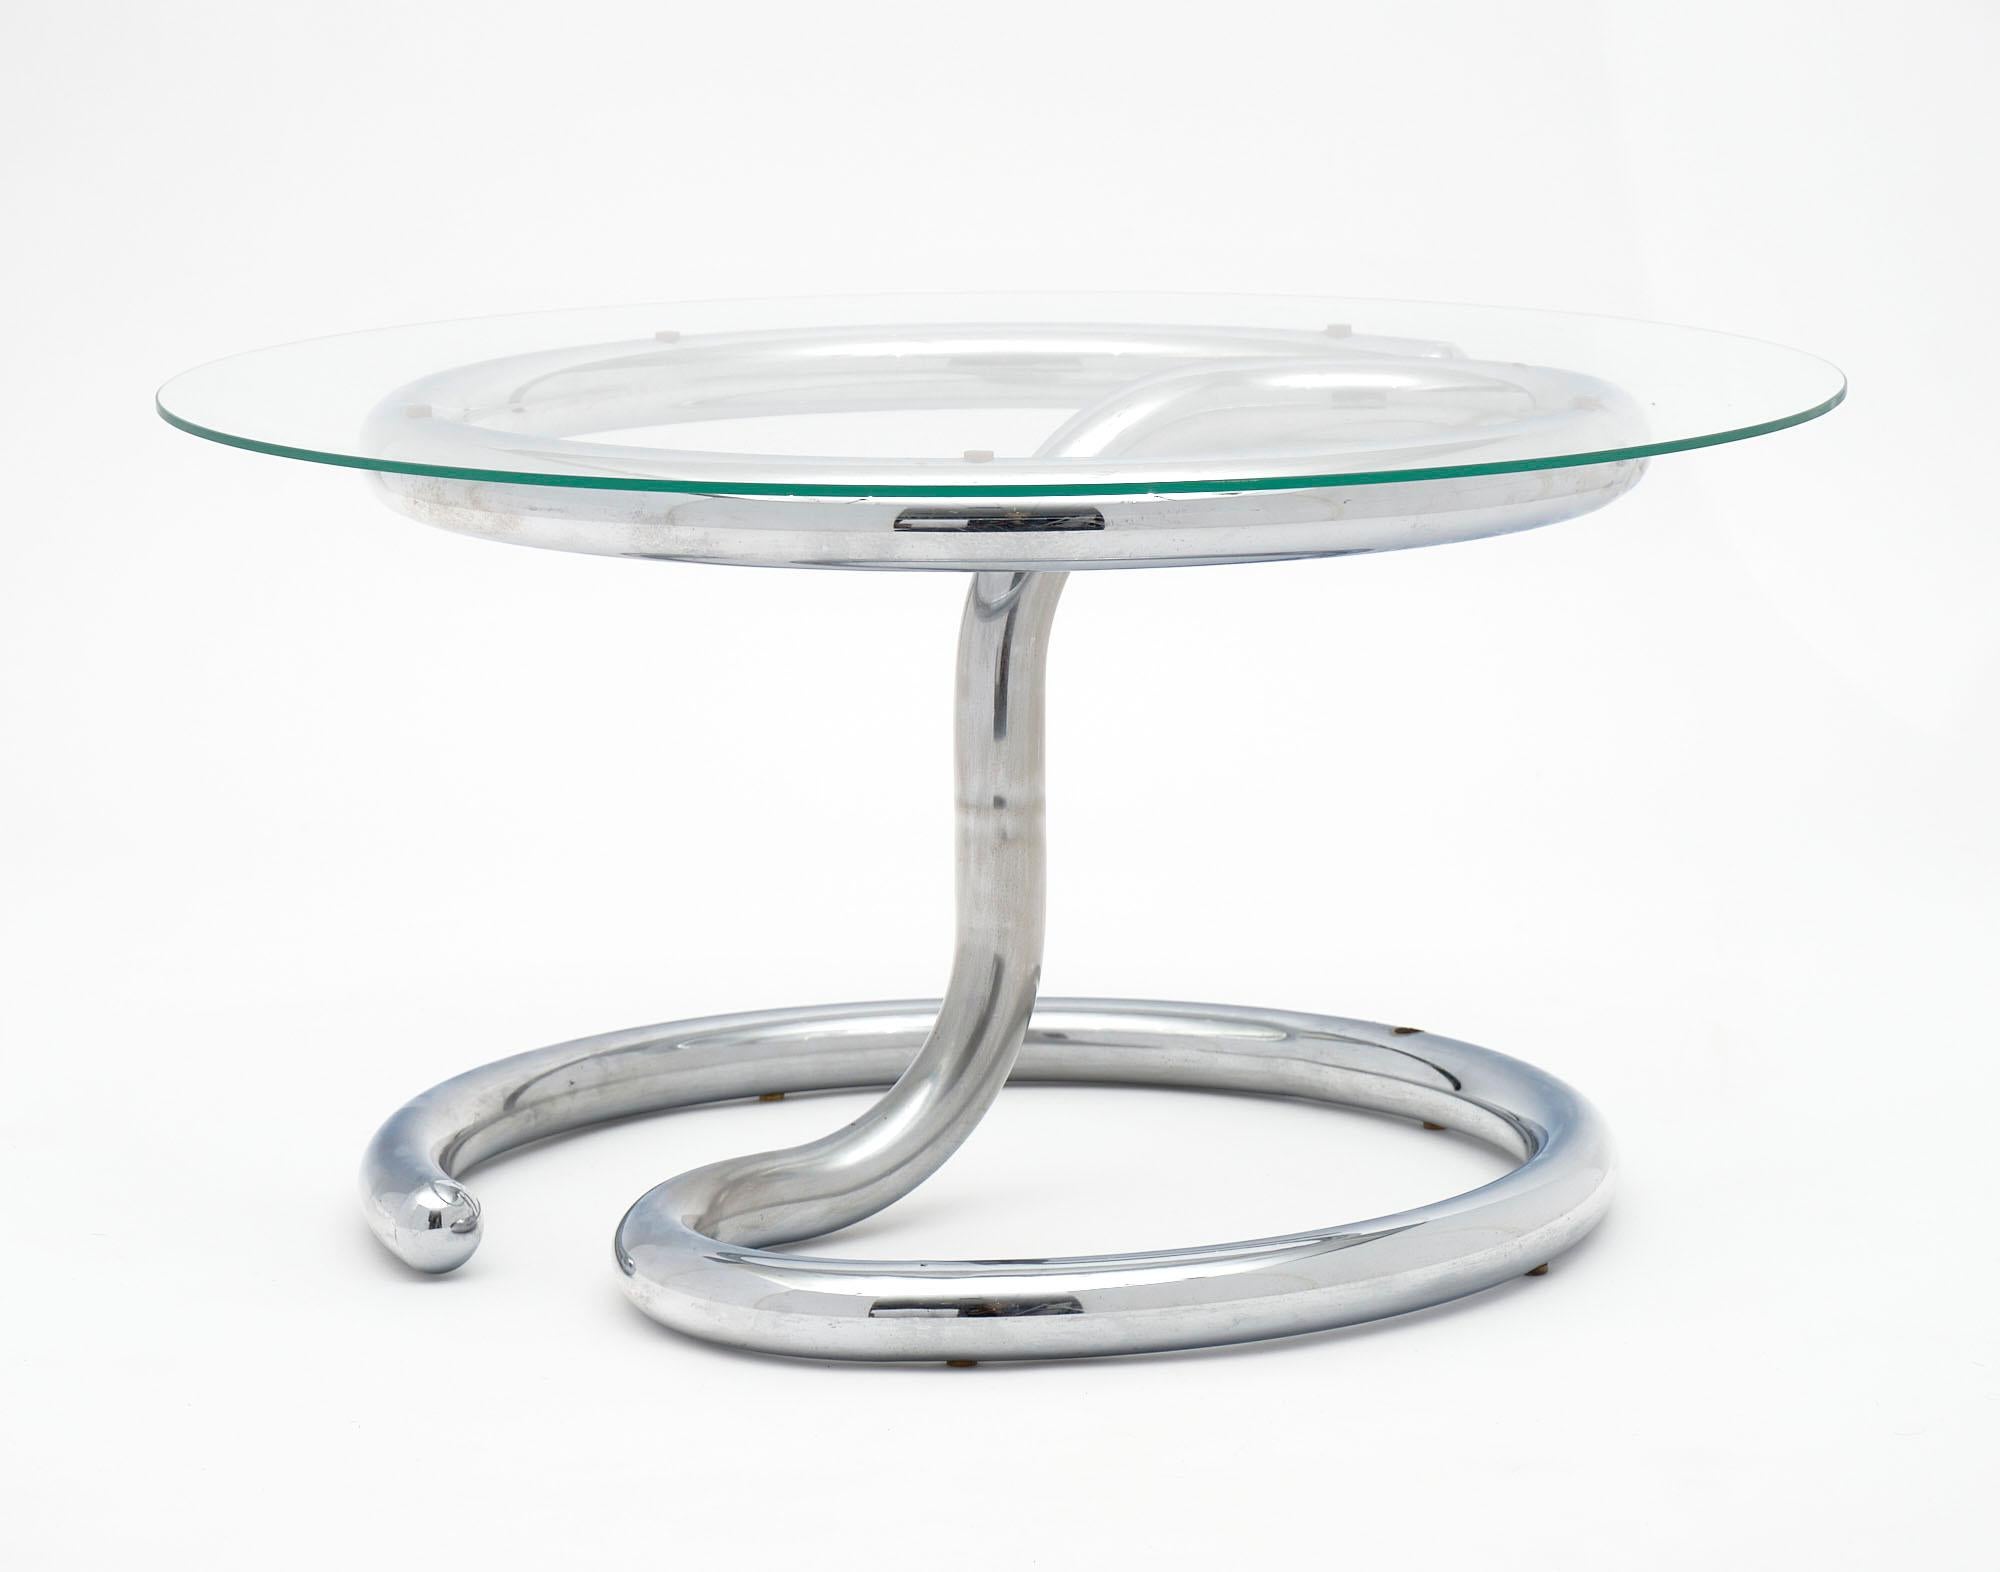 Chromed steel and glass coffee table by Paul Tuttle for Strässle. This mid-century modern piece is in excellent vintage condition. The chromed steel base has slight imperfections with age (scratches; little to no oxidation). The glass is in